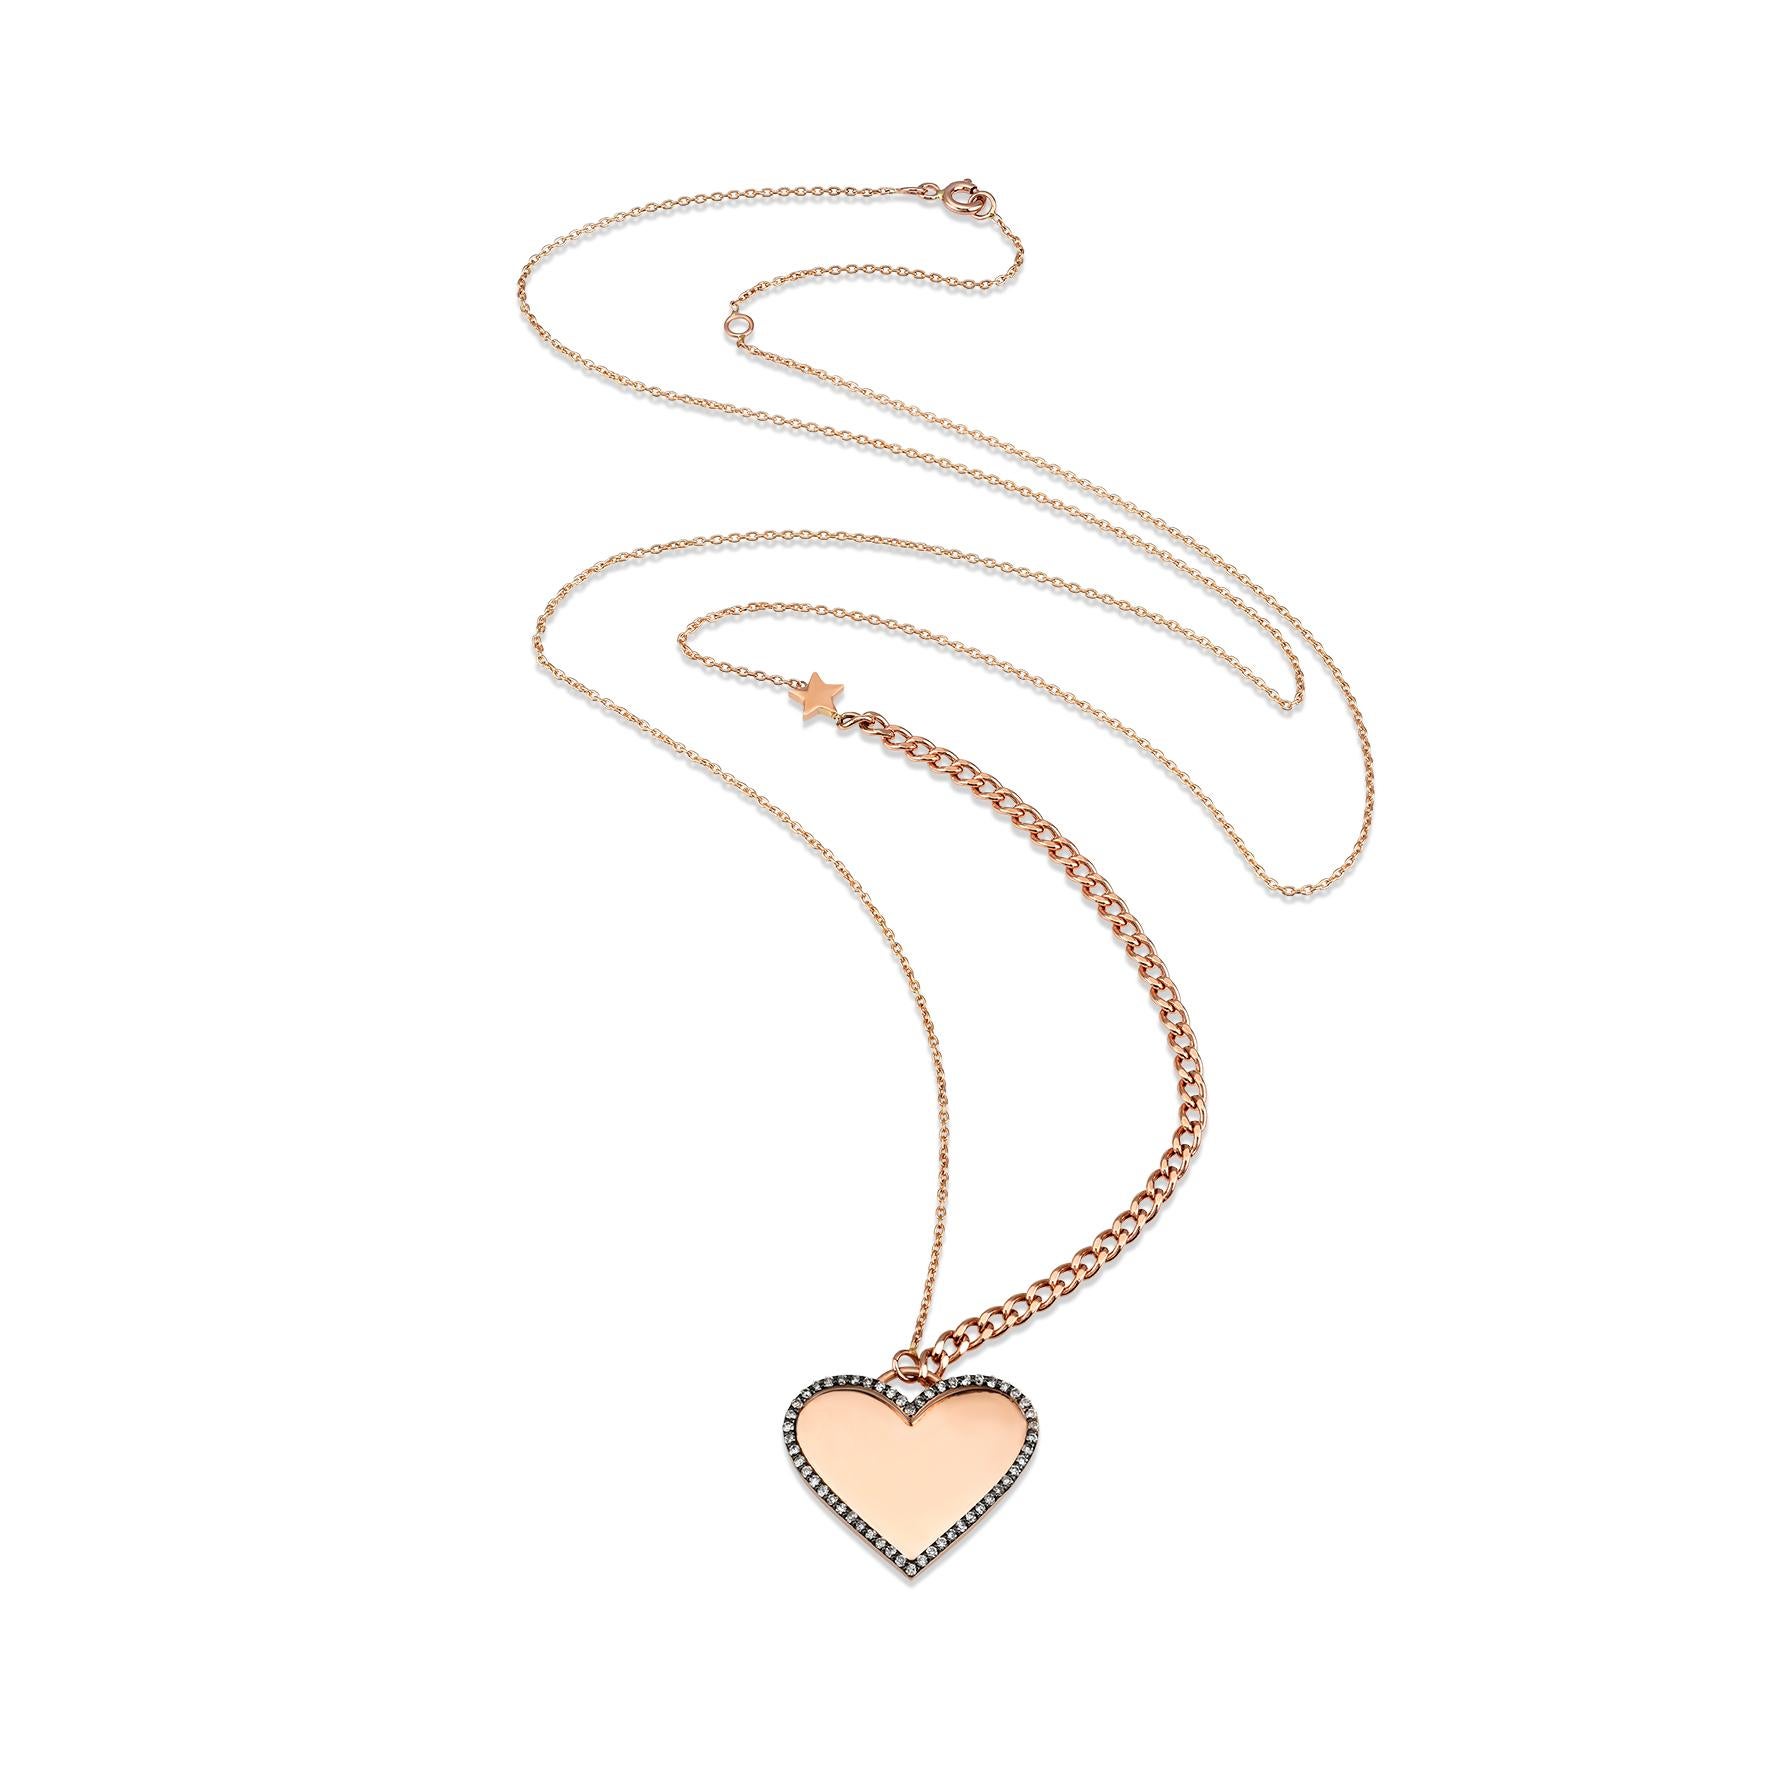 Selda Jewellery heart necklace in 14k rose gold with retro chain & white diamond

Additional Information:-
Collection: You are my star collection
14K Rose gold
0.17ct White diamond
Pendant height 2.5cm
Chain length 66+5cm